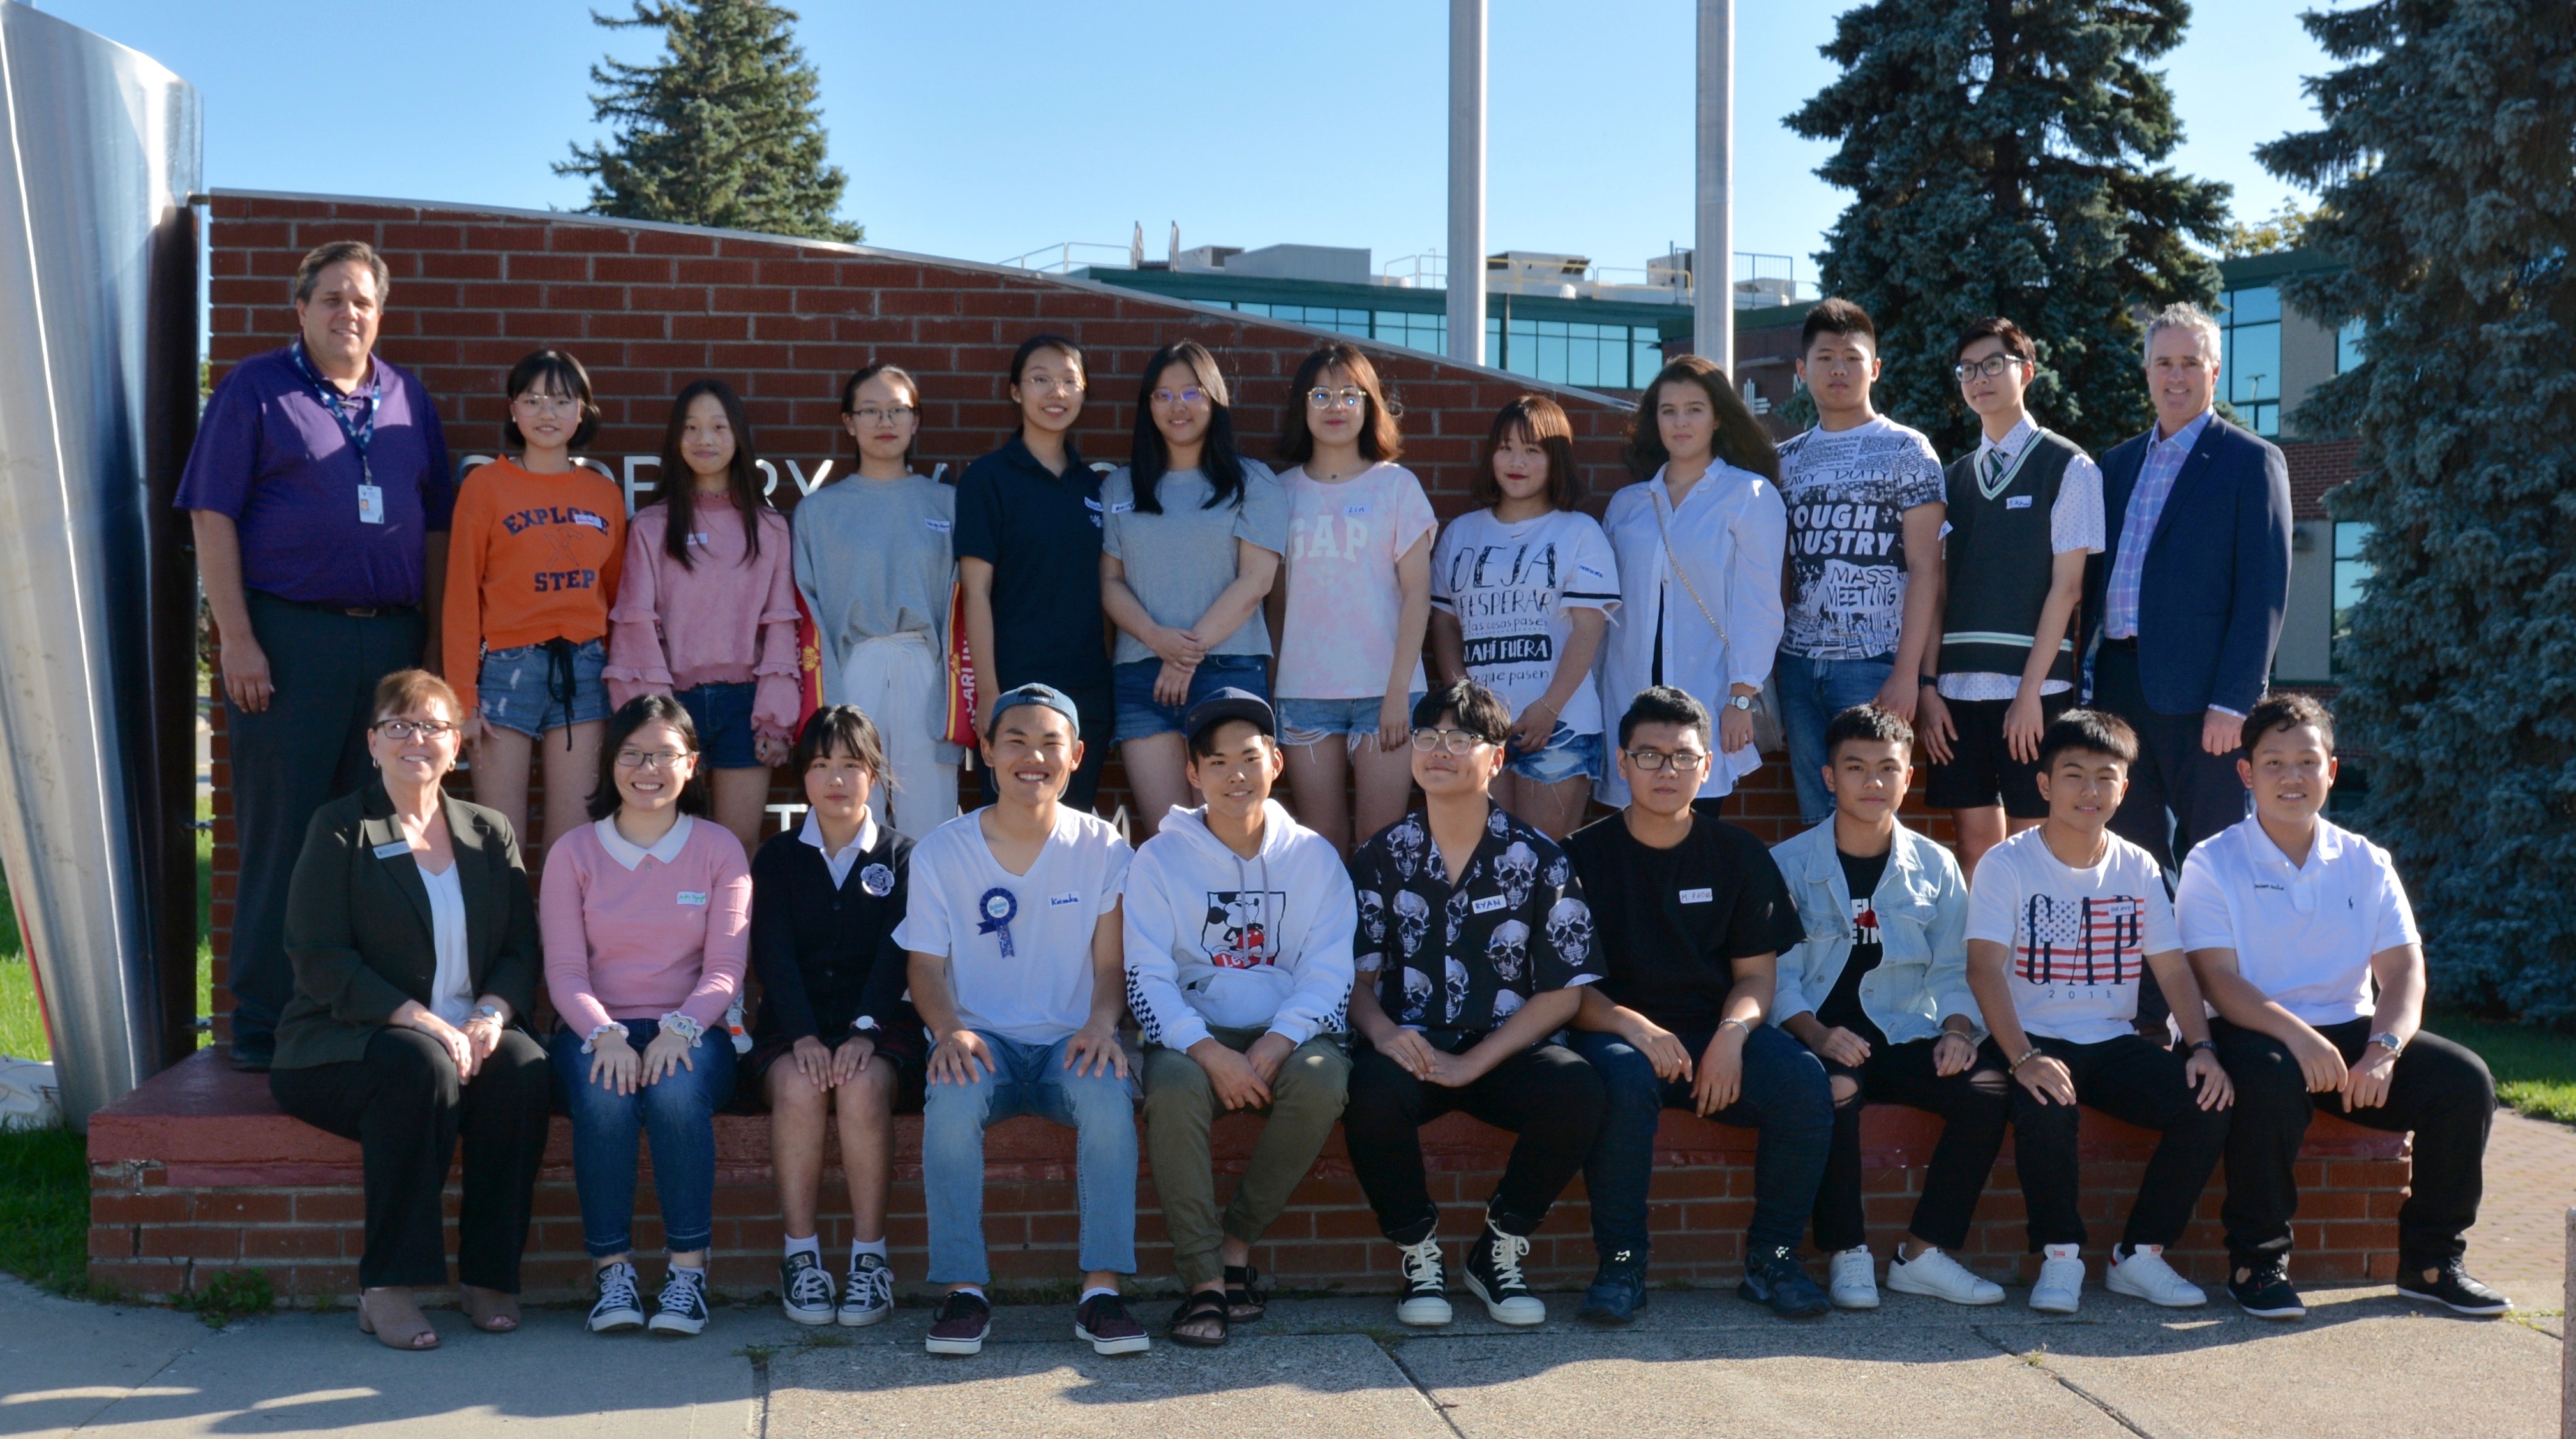 30 students, from the countries of China, Japan, Vietnam and Spain stand with Director of Education Joanne Bénard, Board Chair Michael Bellmore and Superintendent Terry Ppaineau.